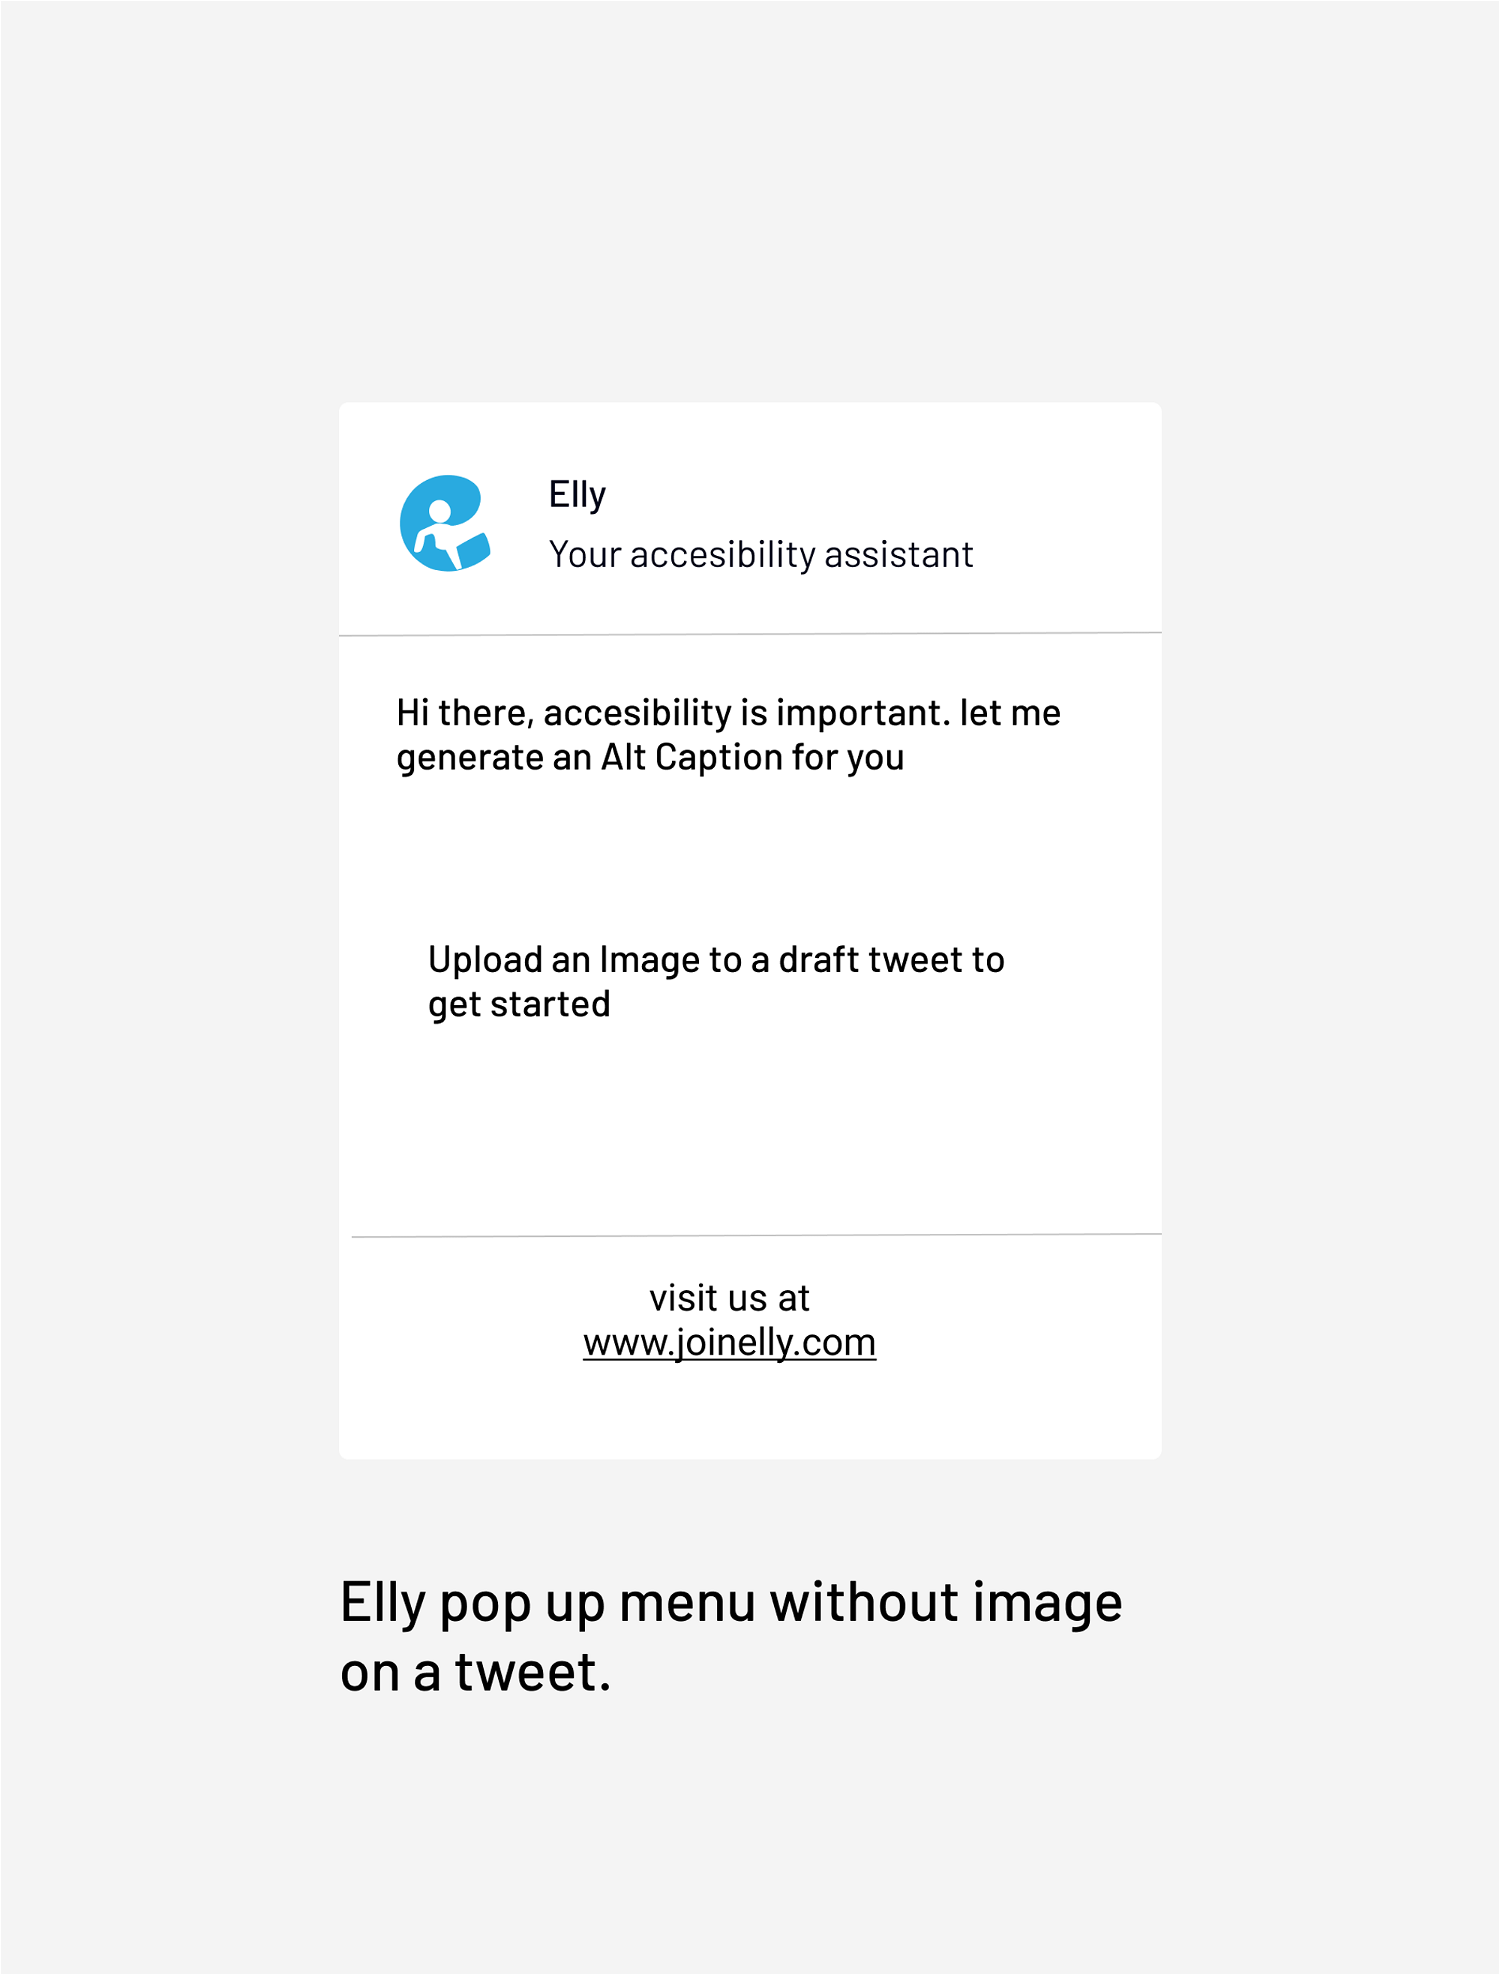 Elly pop up without image on a draft tweet